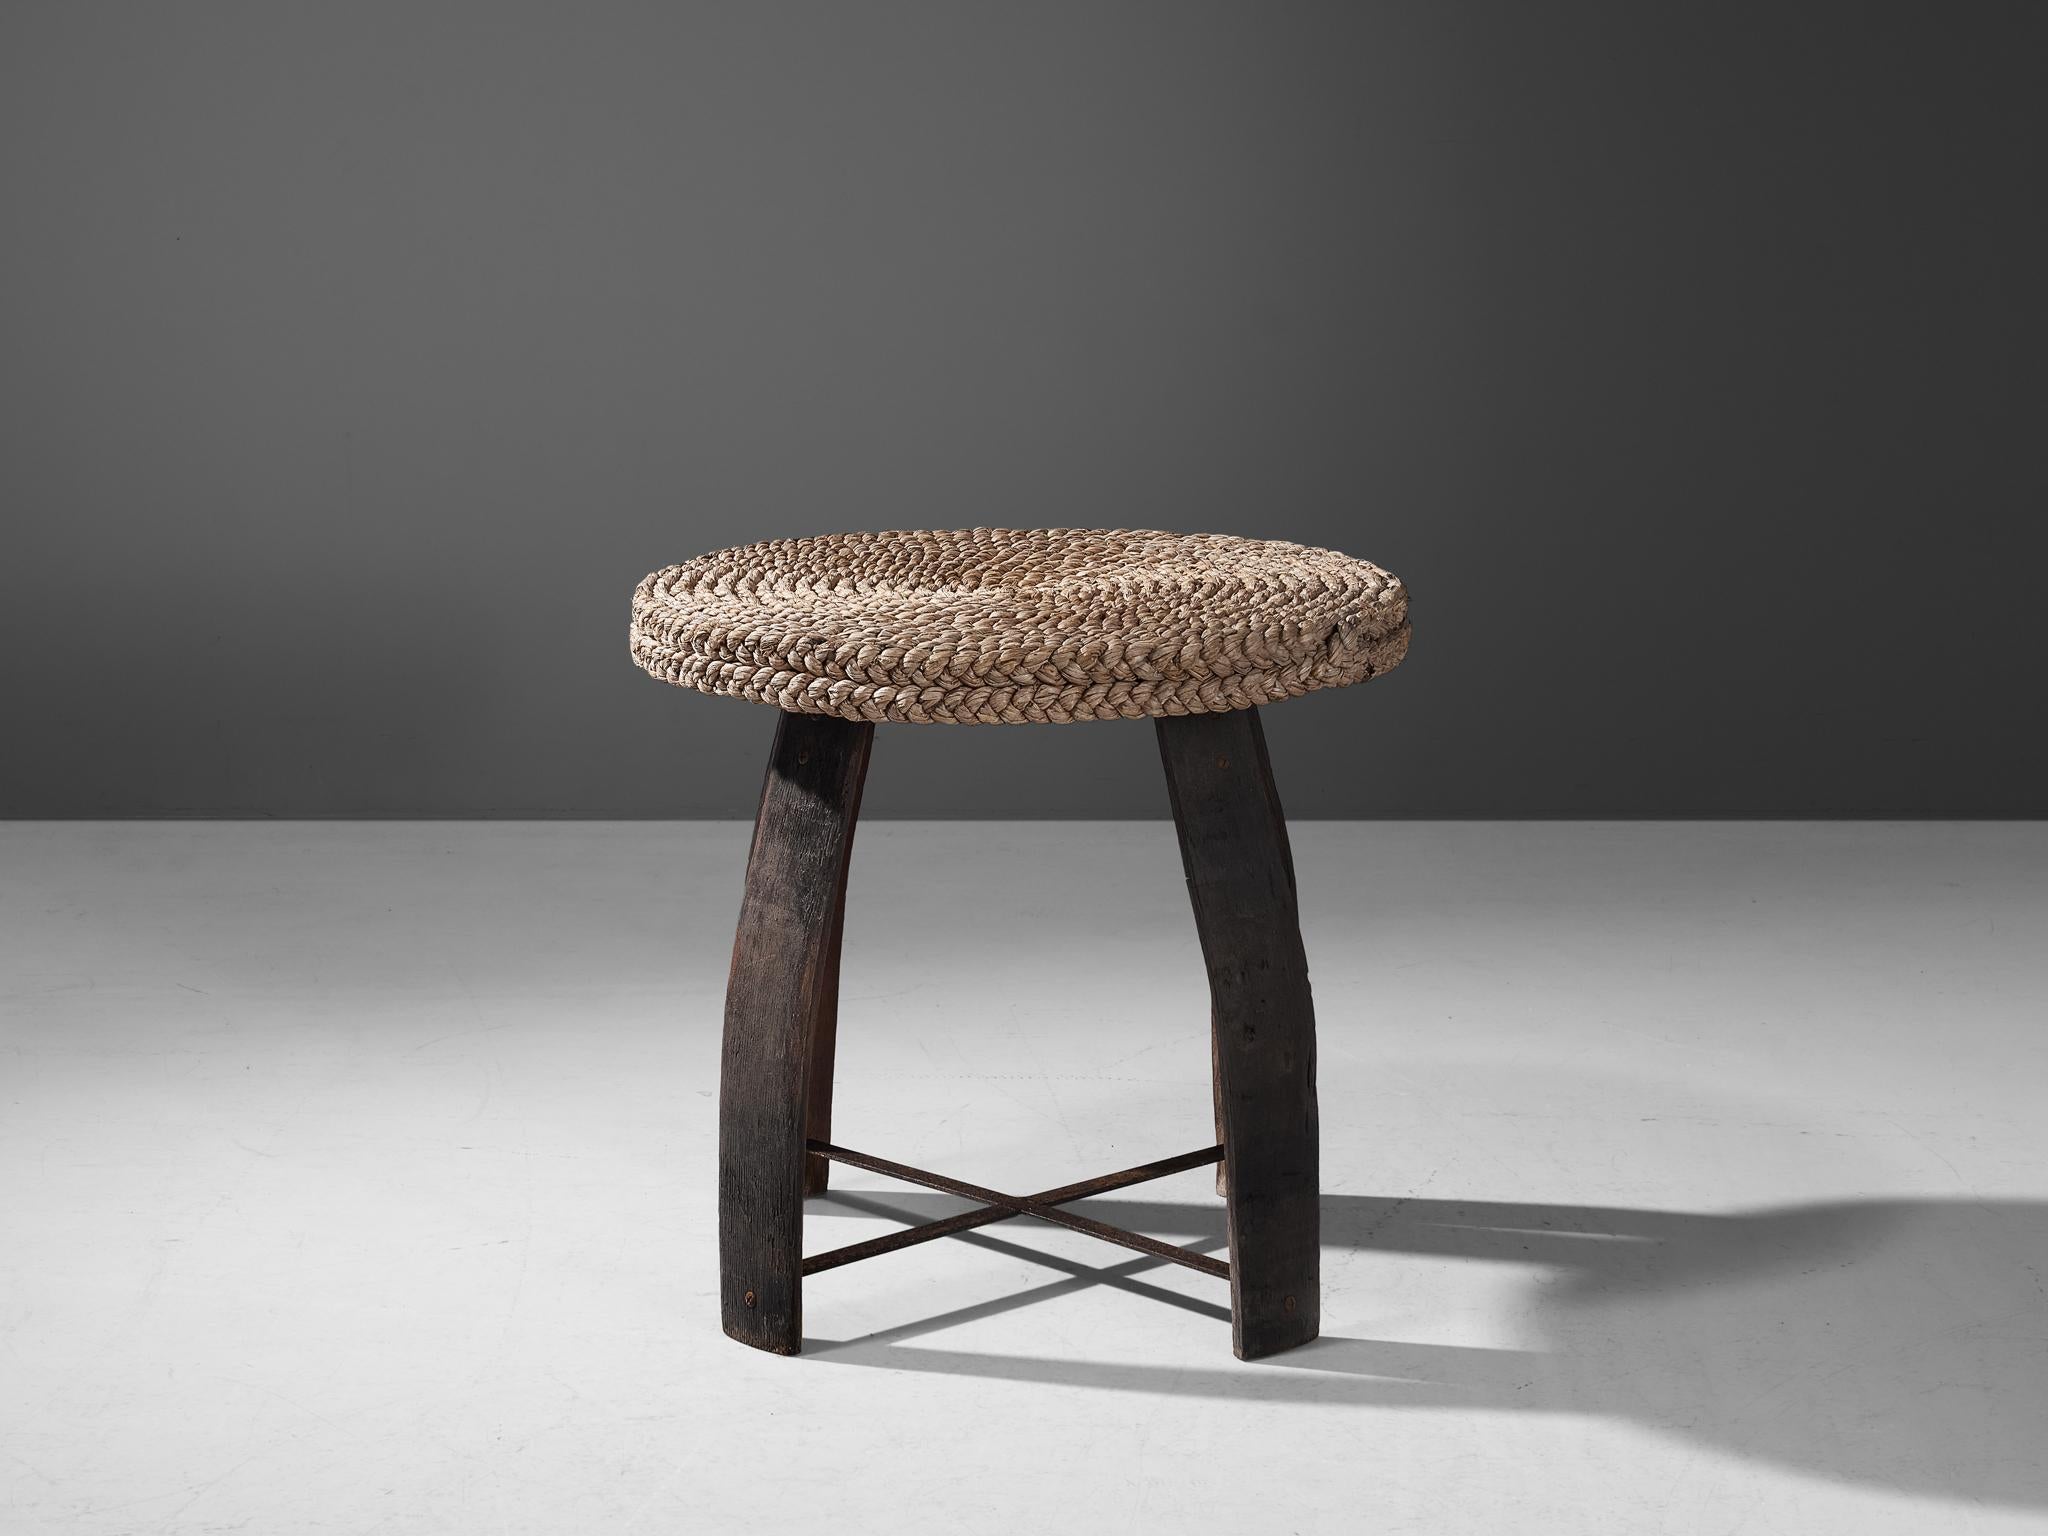 Adrien Audoux and Frida Minet, table, oak, straw, France, 1950s

This rare table was created by the French designer couple Adrien Audoux and Frida Minet. The legs of the table are made of dark oak. The wood was originally used for wine barrels.